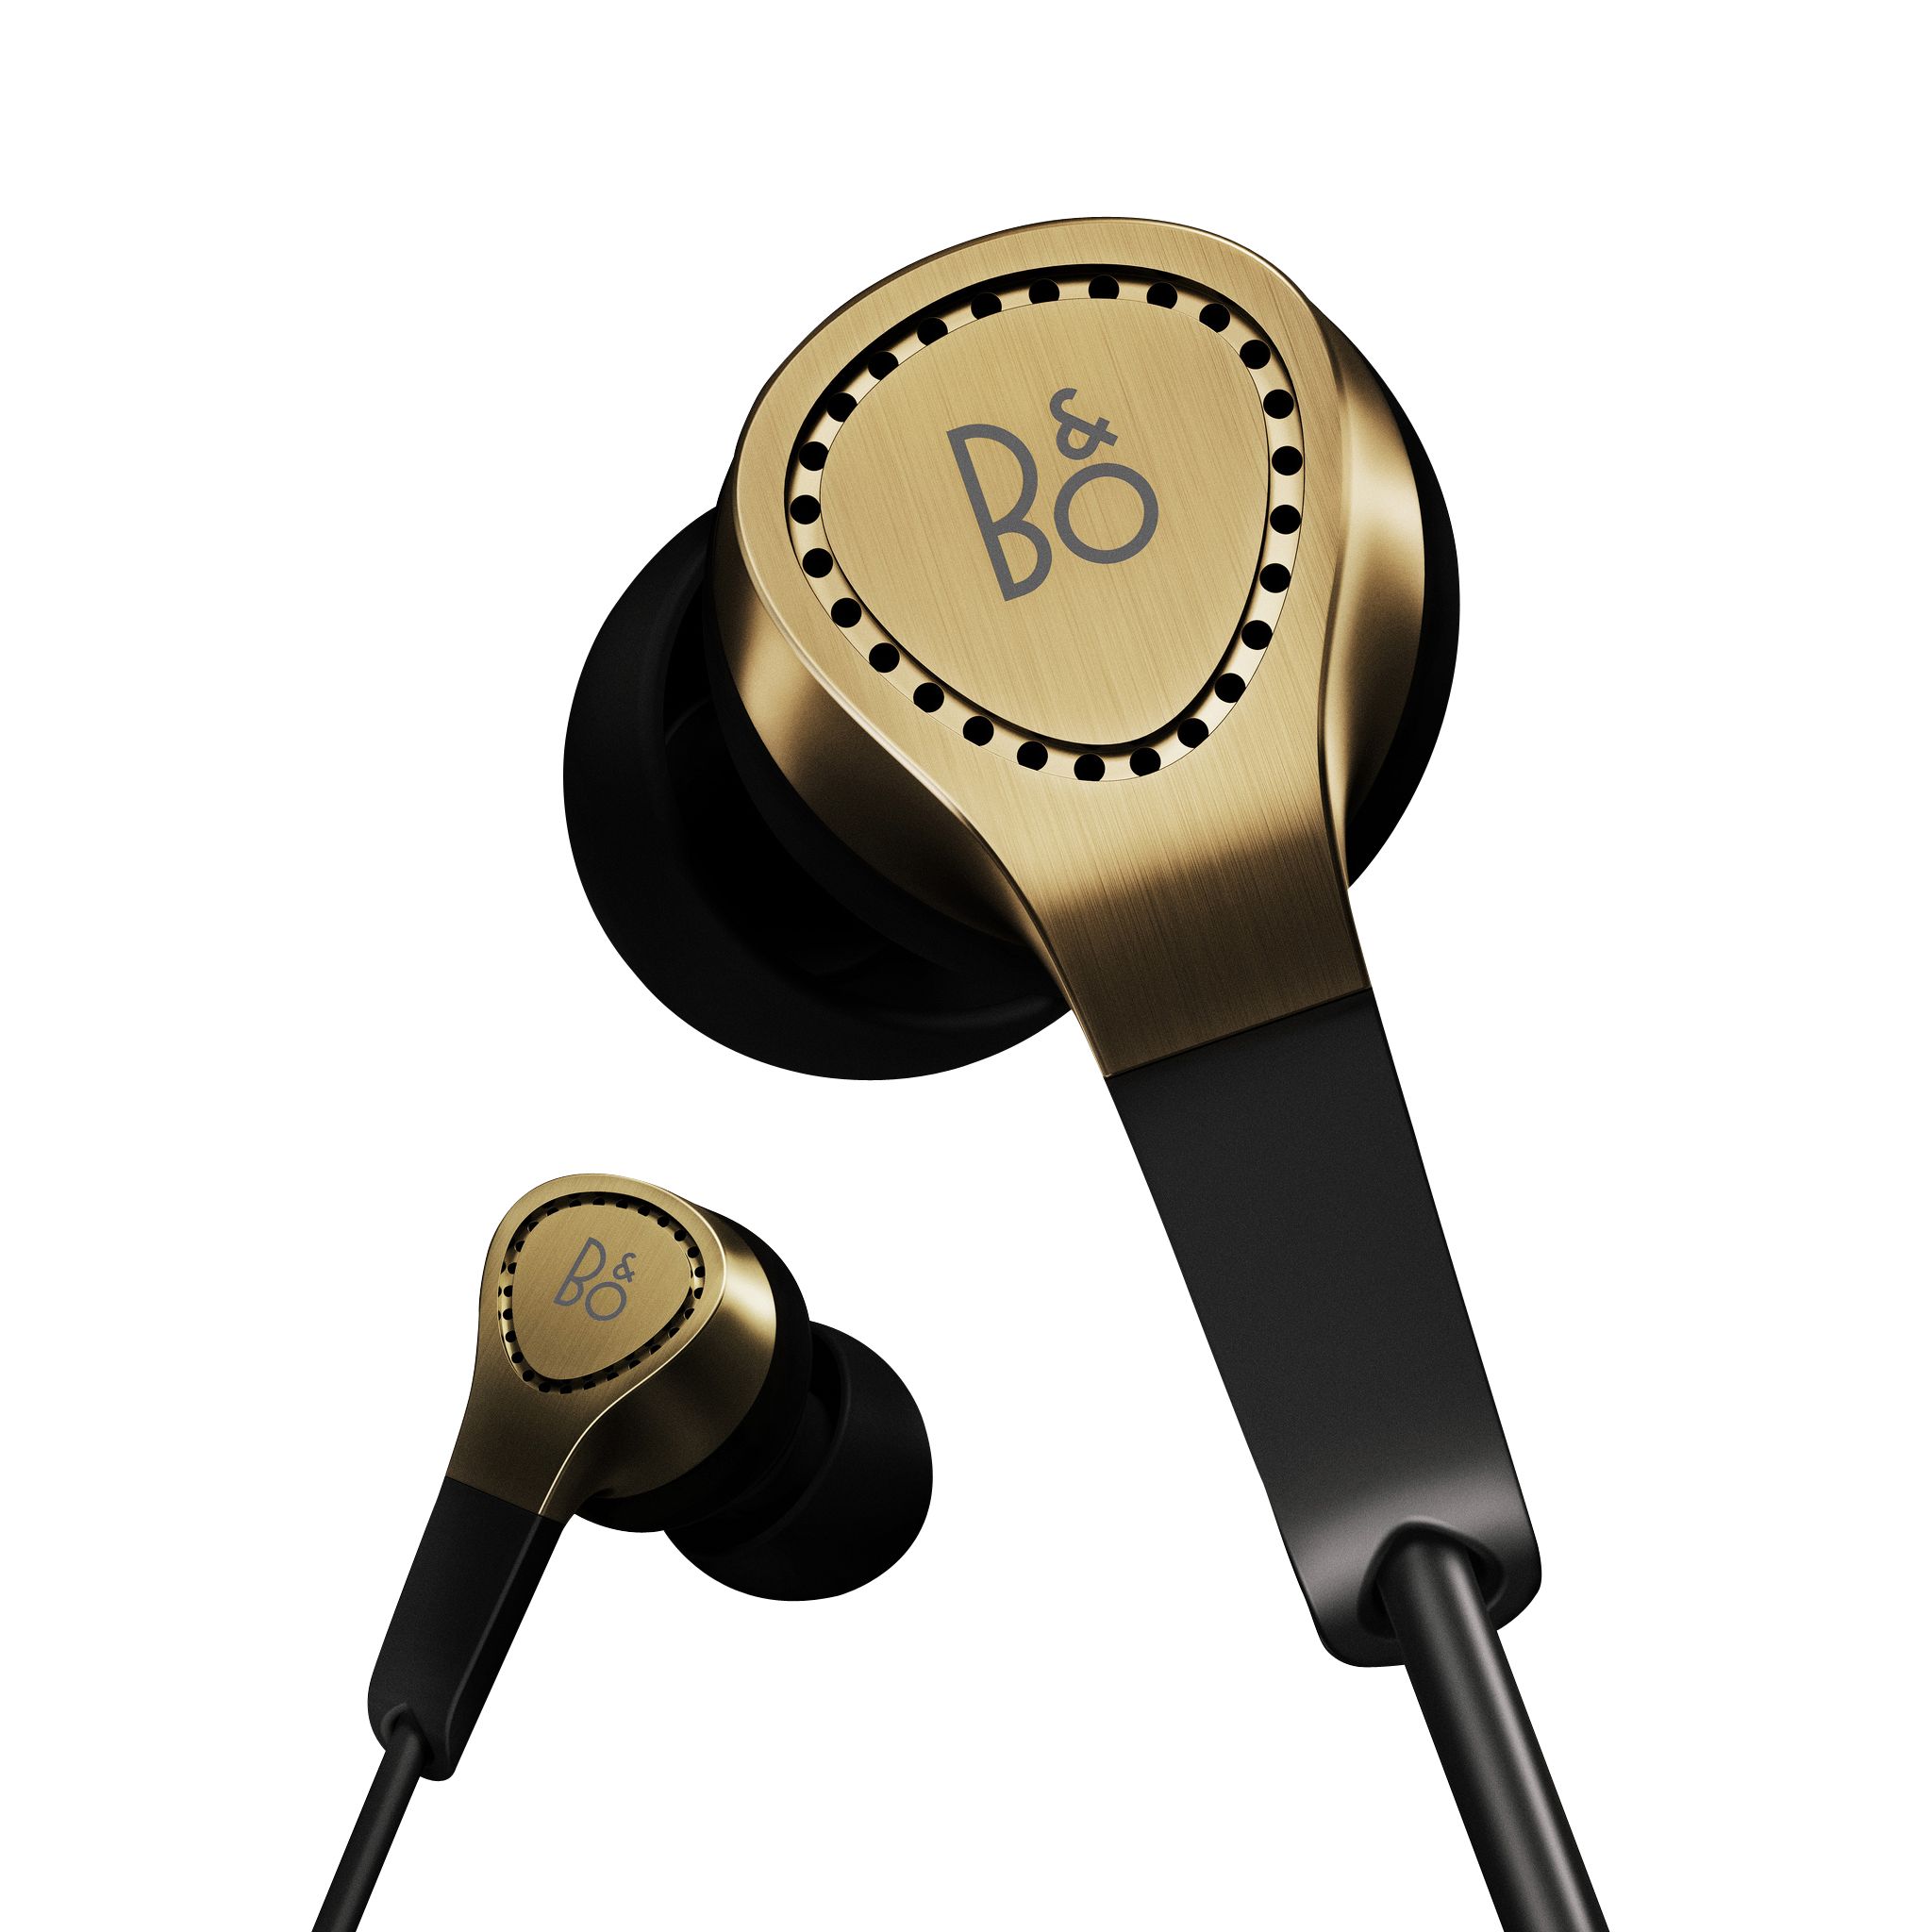 Bang & Olufsen Beoplay H3 In-Ear Headphones with Mic/Remote for iOS Devices